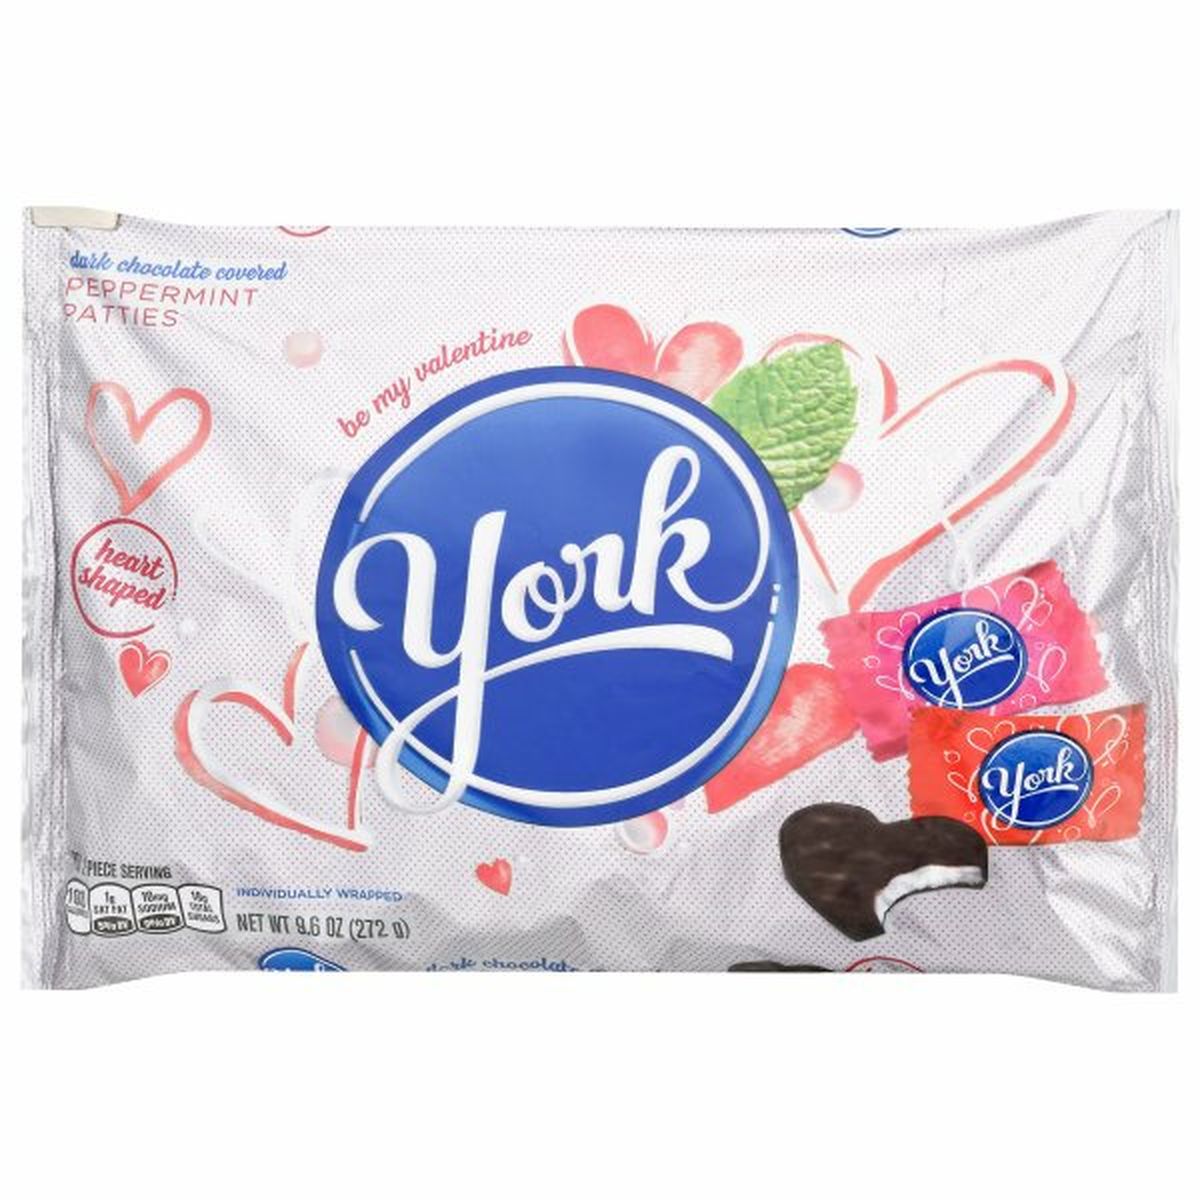 Calories in YORK Dark Chocolate Covered, Peppermint Patties, Heart Shaped